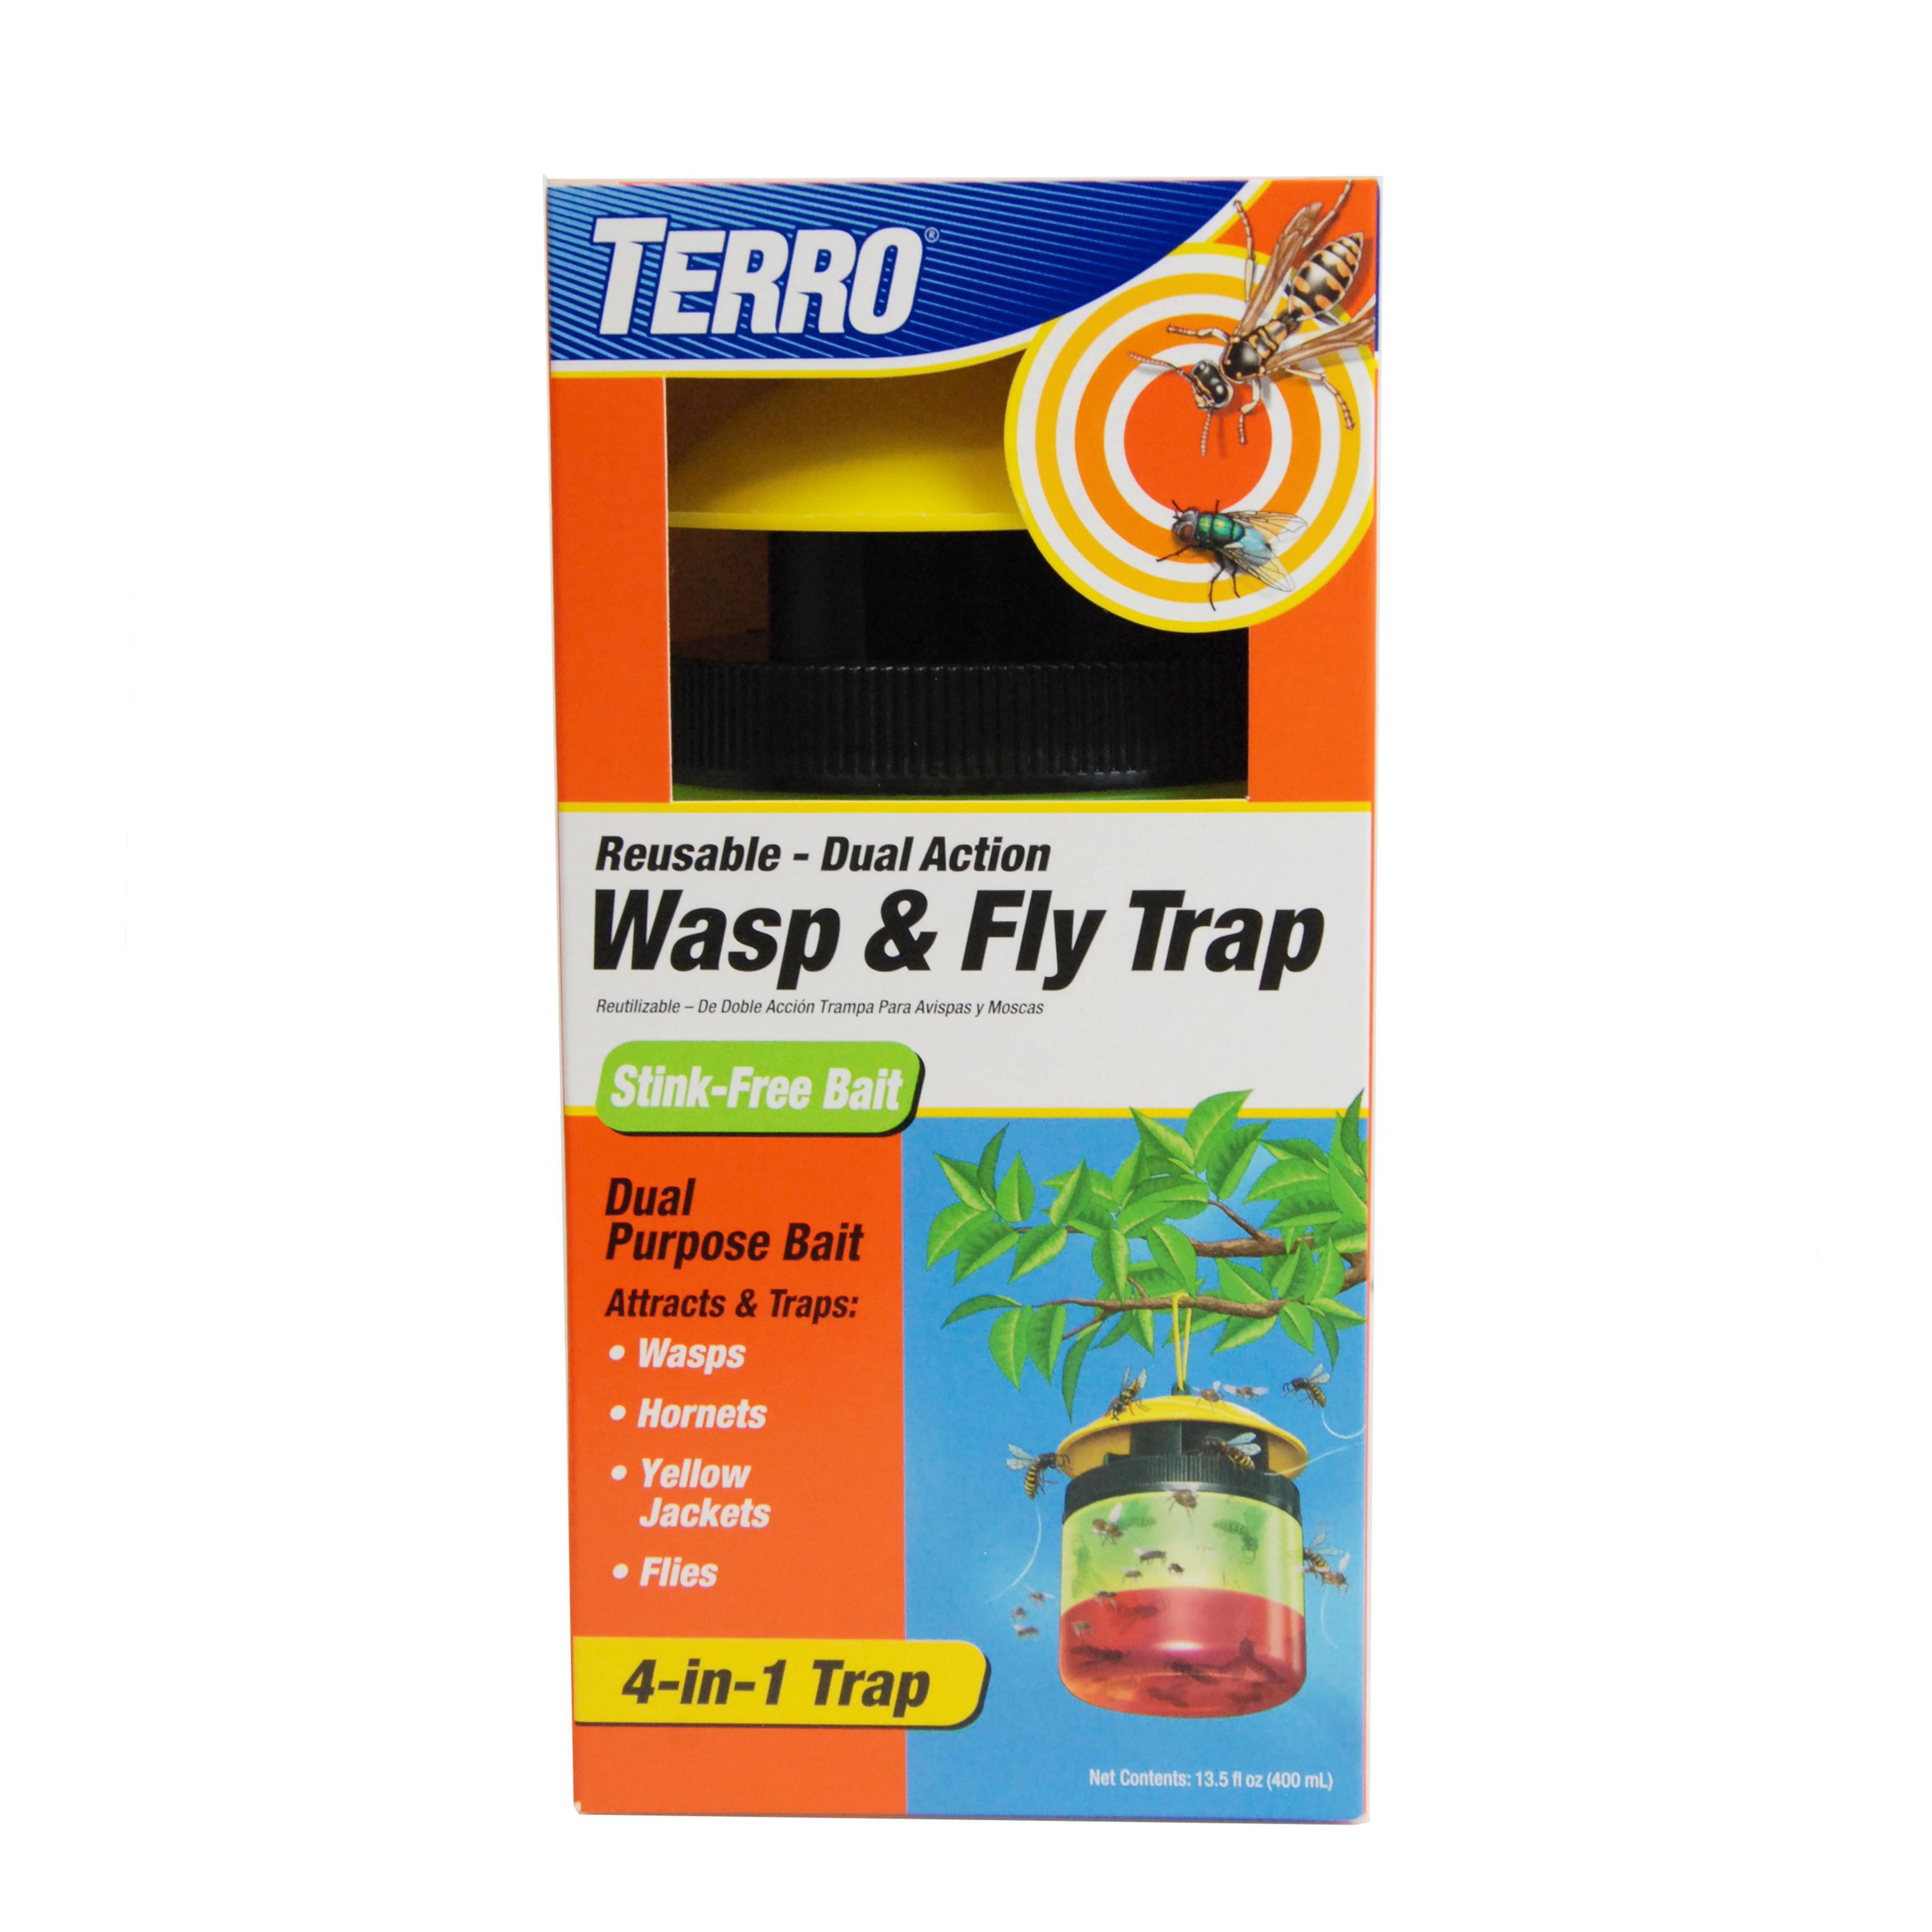 TERRO T515 Wasp & Fly Trap plus Fruit Fly – Refill, 1 Pack✔️✓